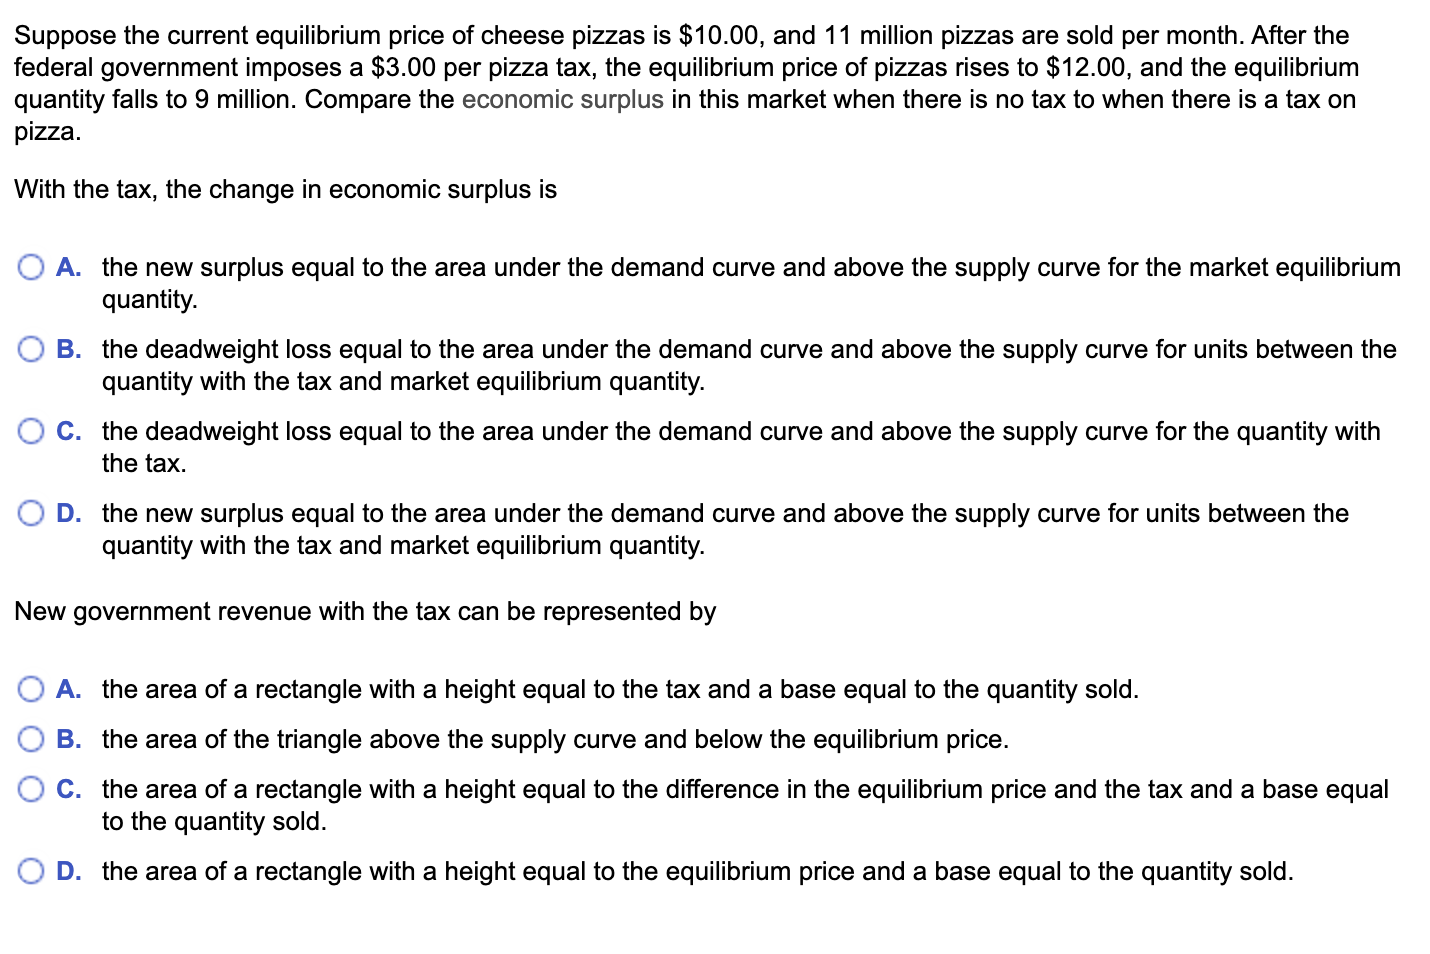 Suppose the current equilibrium price of cheese pizzas is $10.00, and 11 million pizzas are sold per month. After the
federal government imposes a $3.00 per pizza tax, the equilibrium price of pizzas rises to $12.00, and the equilibrium
quantity falls to 9 million. Compare the economic surplus in this market when there is no tax to when there is a tax on
pizza.
With the tax, the change in economic surplus is
O A. the new surplus equal to the area under the demand curve and above the supply curve for the market equilibrium
quantity.
B. the deadweight loss equal to the area under the demand curve and above the supply curve for units between the
quantity with the tax and market equilibrium quantity.
O C. the deadweight loss equal to the area under the demand curve and above the supply curve for the quantity with
the tax.
D. the new surplus equal to the area under the demand curve and above the supply curve for units between the
quantity with the tax and market equilibrium quantity.
New government revenue with the tax can be represented by
A. the area of a rectangle with a height equal to the tax and a base equal to the quantity sold.
B. the area of the triangle above the supply curve and below the equilibrium price.
C. the area of a rectangle with a height equal to the difference in the equilibrium price and the tax and a base equal
to the quantity sold.
D. the area of a rectangle with a height equal to the equilibrium price and a base equal to the quantity sold.
